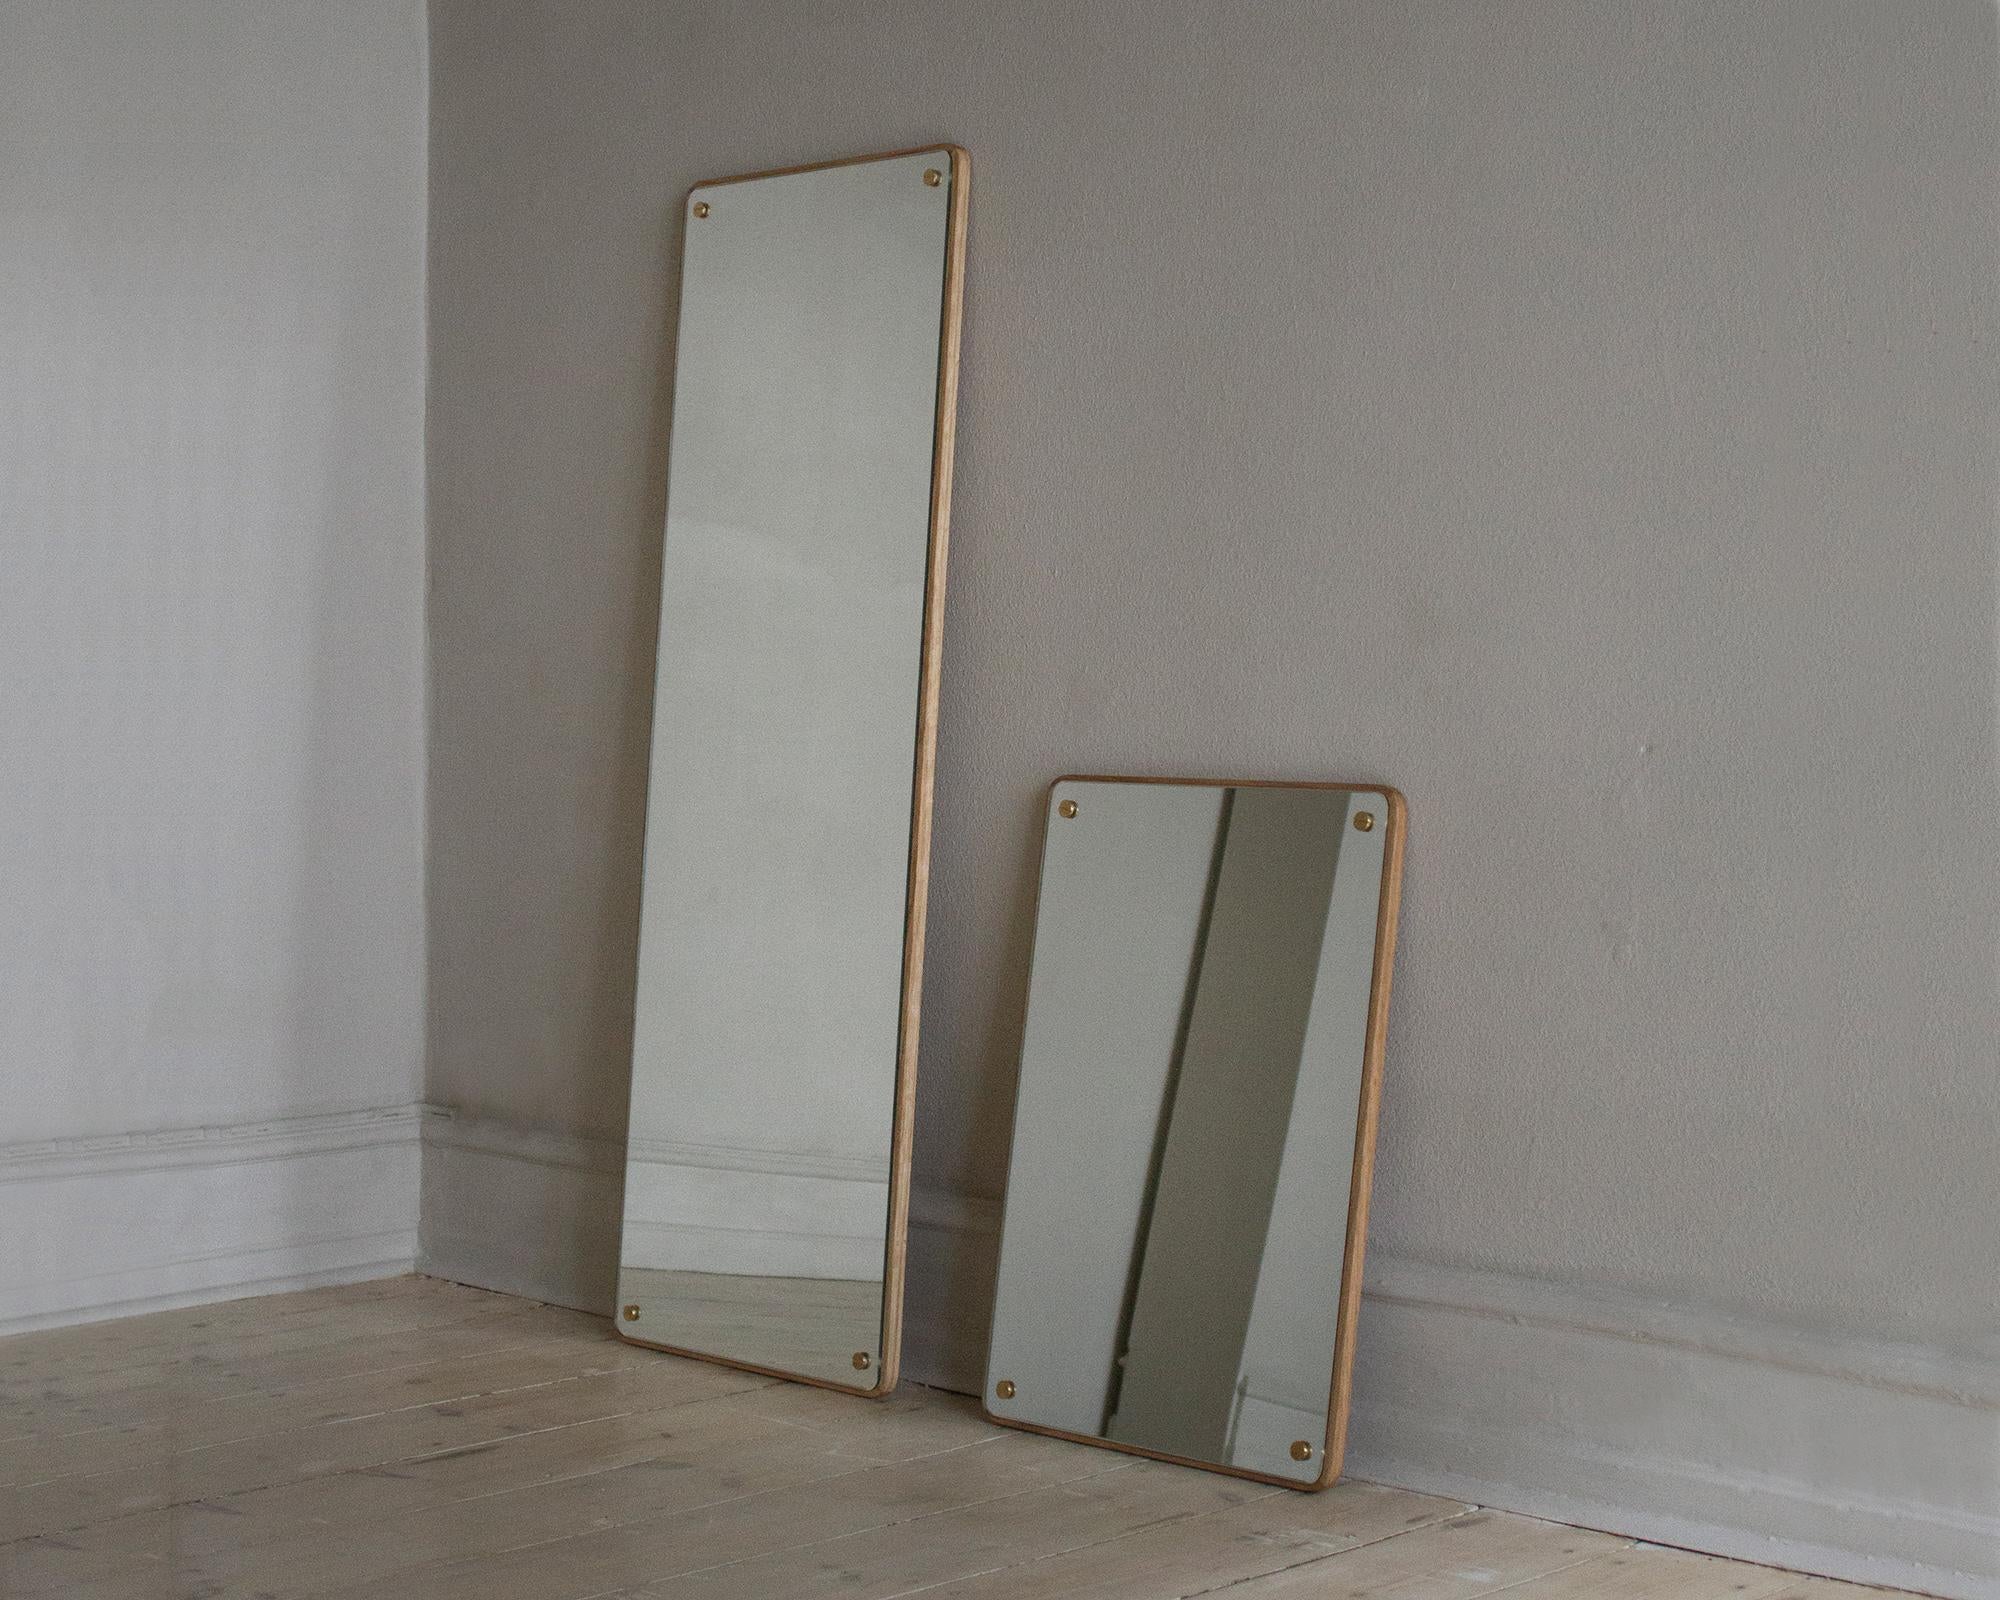 The rectangle mirror is an updated take on a classic standard. With carefully articulated sizing to fit a number of uses, the classic mirror is mounted to a solid oak back. Visible screws that celebrate the analog approach to construction are